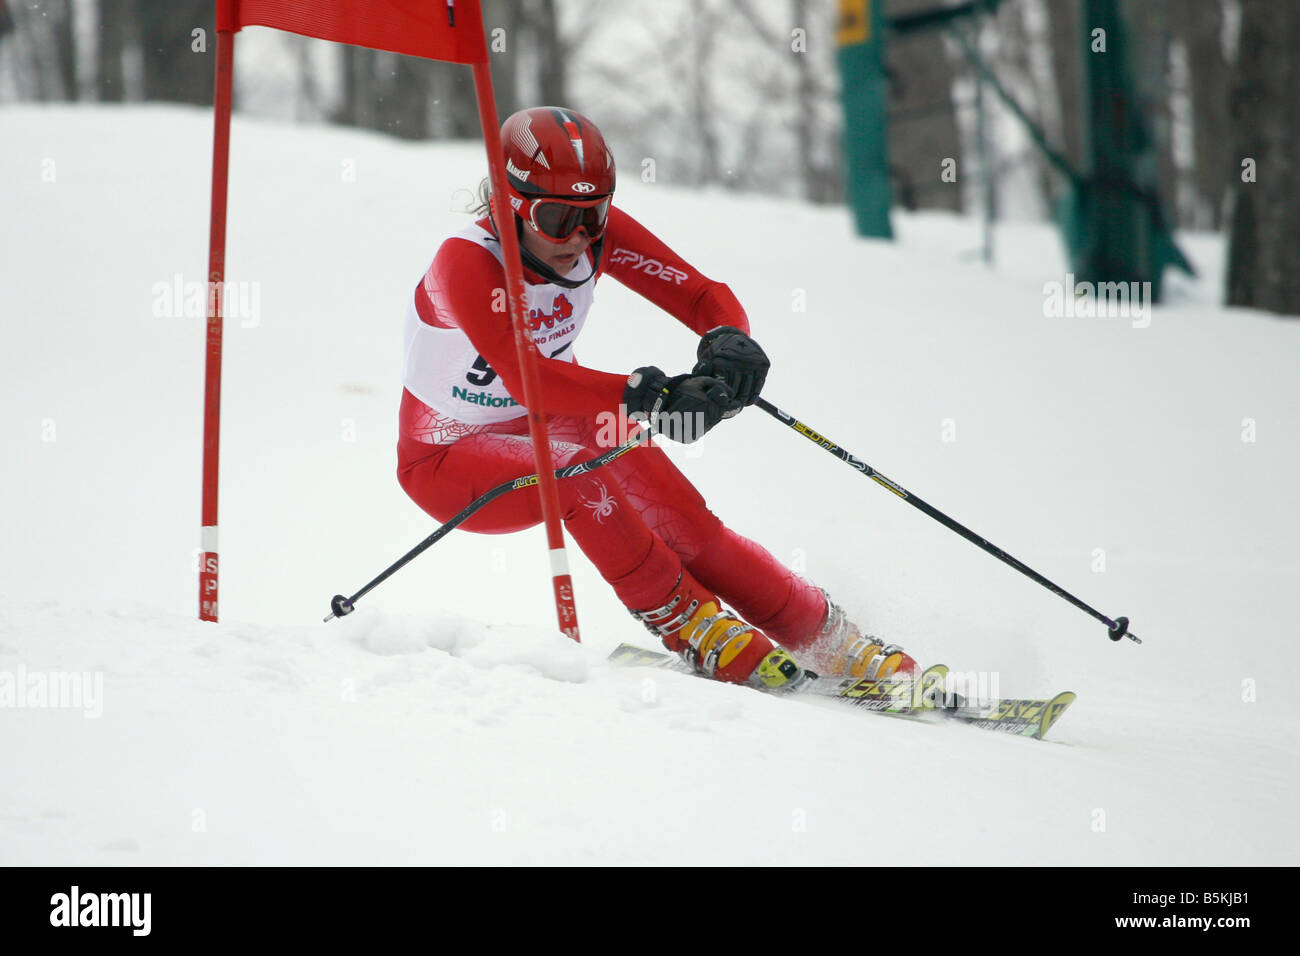 Teenage girl turning at a gate during a downhill giant slalom ski race. Stock Photo